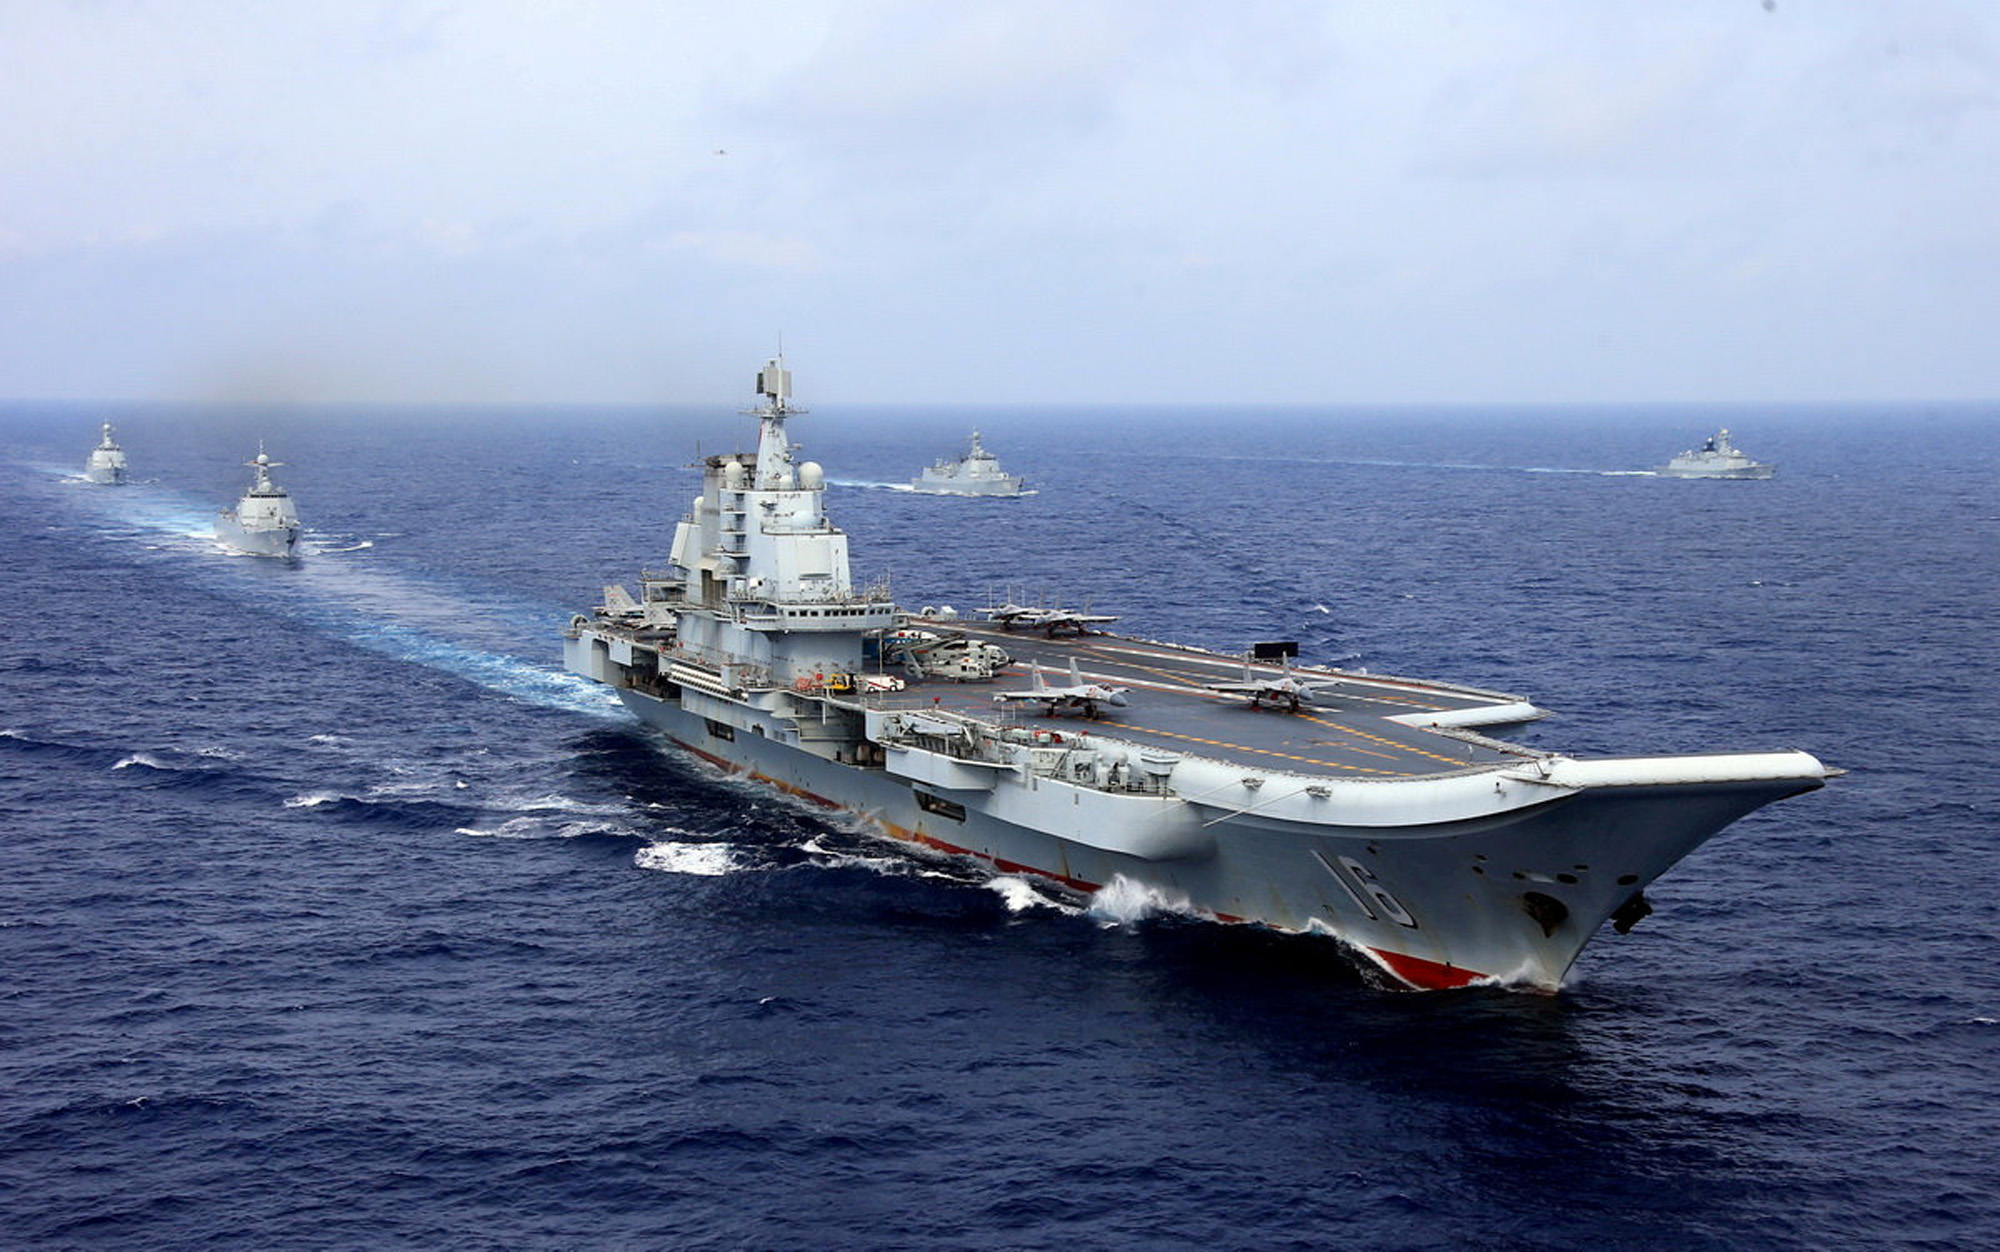 Chinese naval vessels led by the aircraft carrier Liaoning participate in a military exercise in the Western Pacific in April 2018. | REUTERS